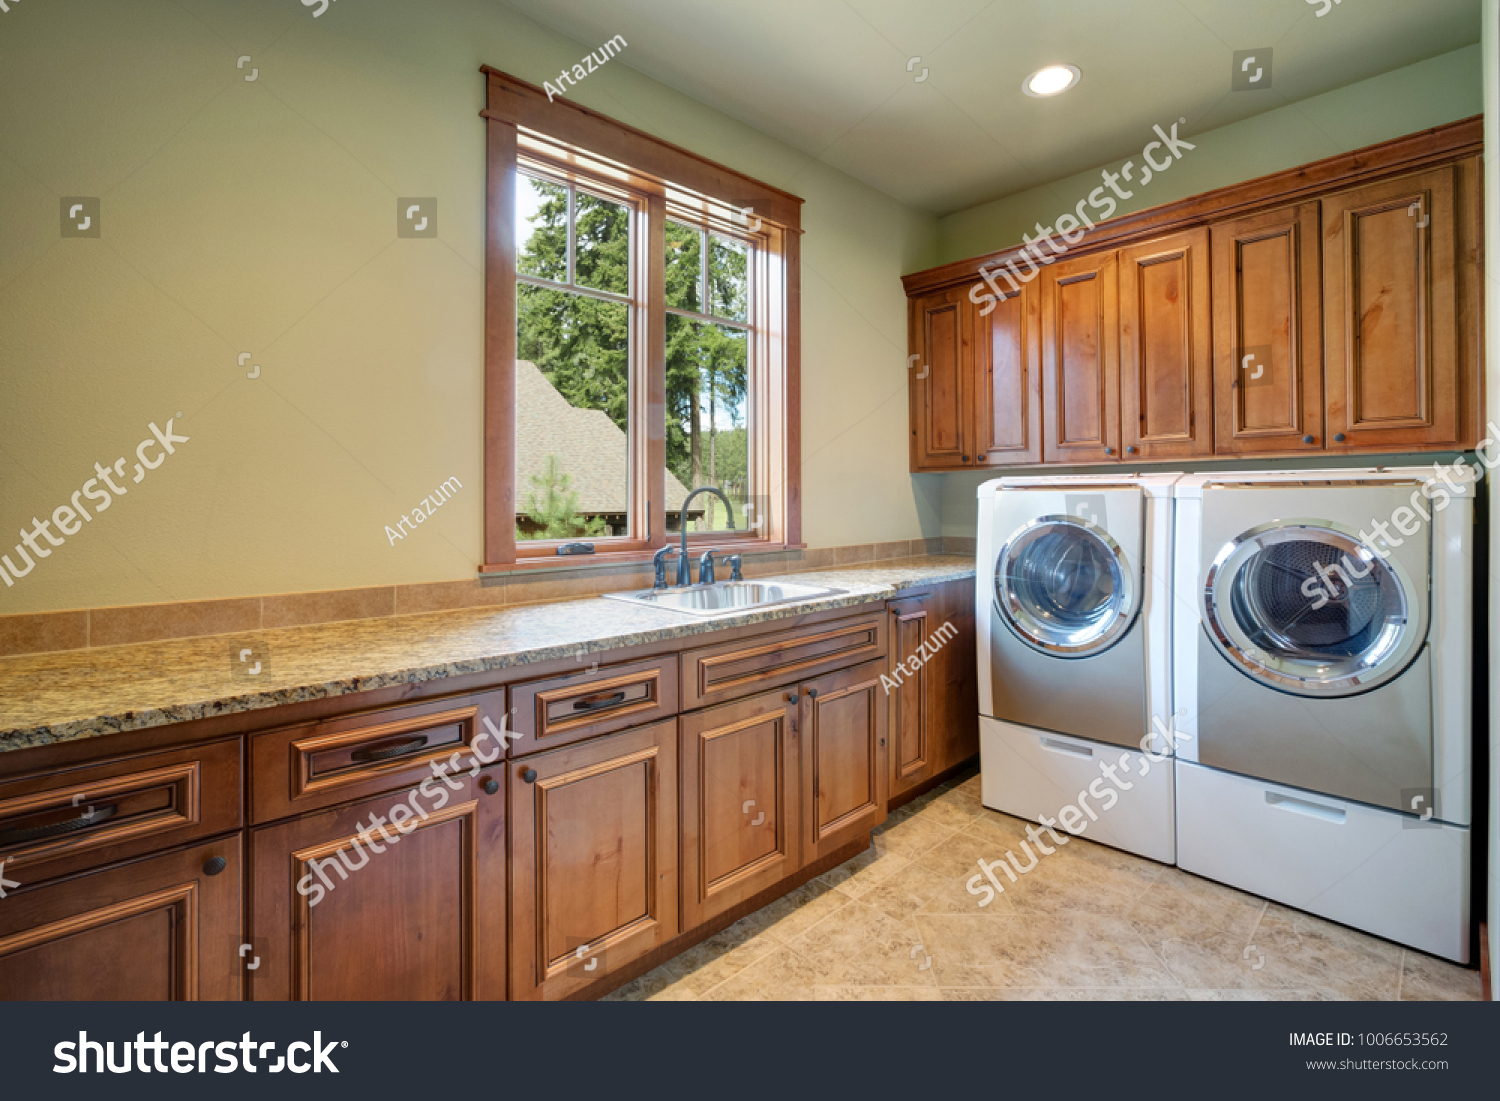 Huge Laundry Room White Washer Dryer Stock Photo Edit Now 1006653562